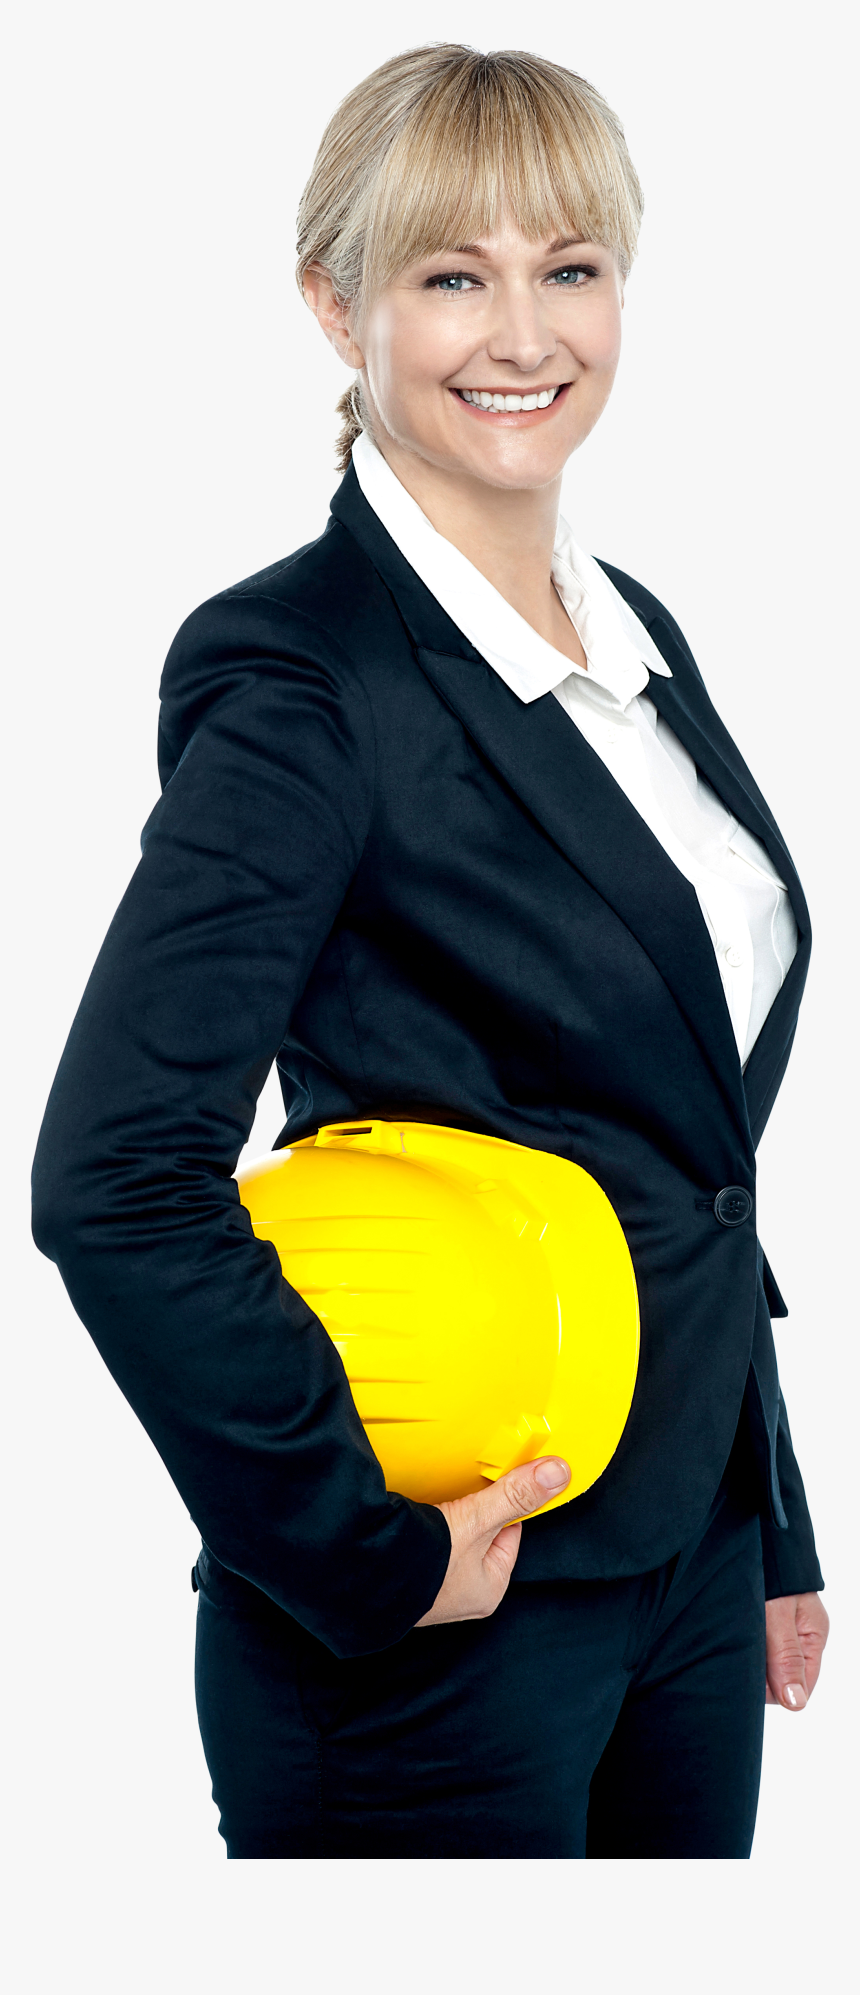 Women Architect - Portable Network Graphics, HD Png Download, Free Download